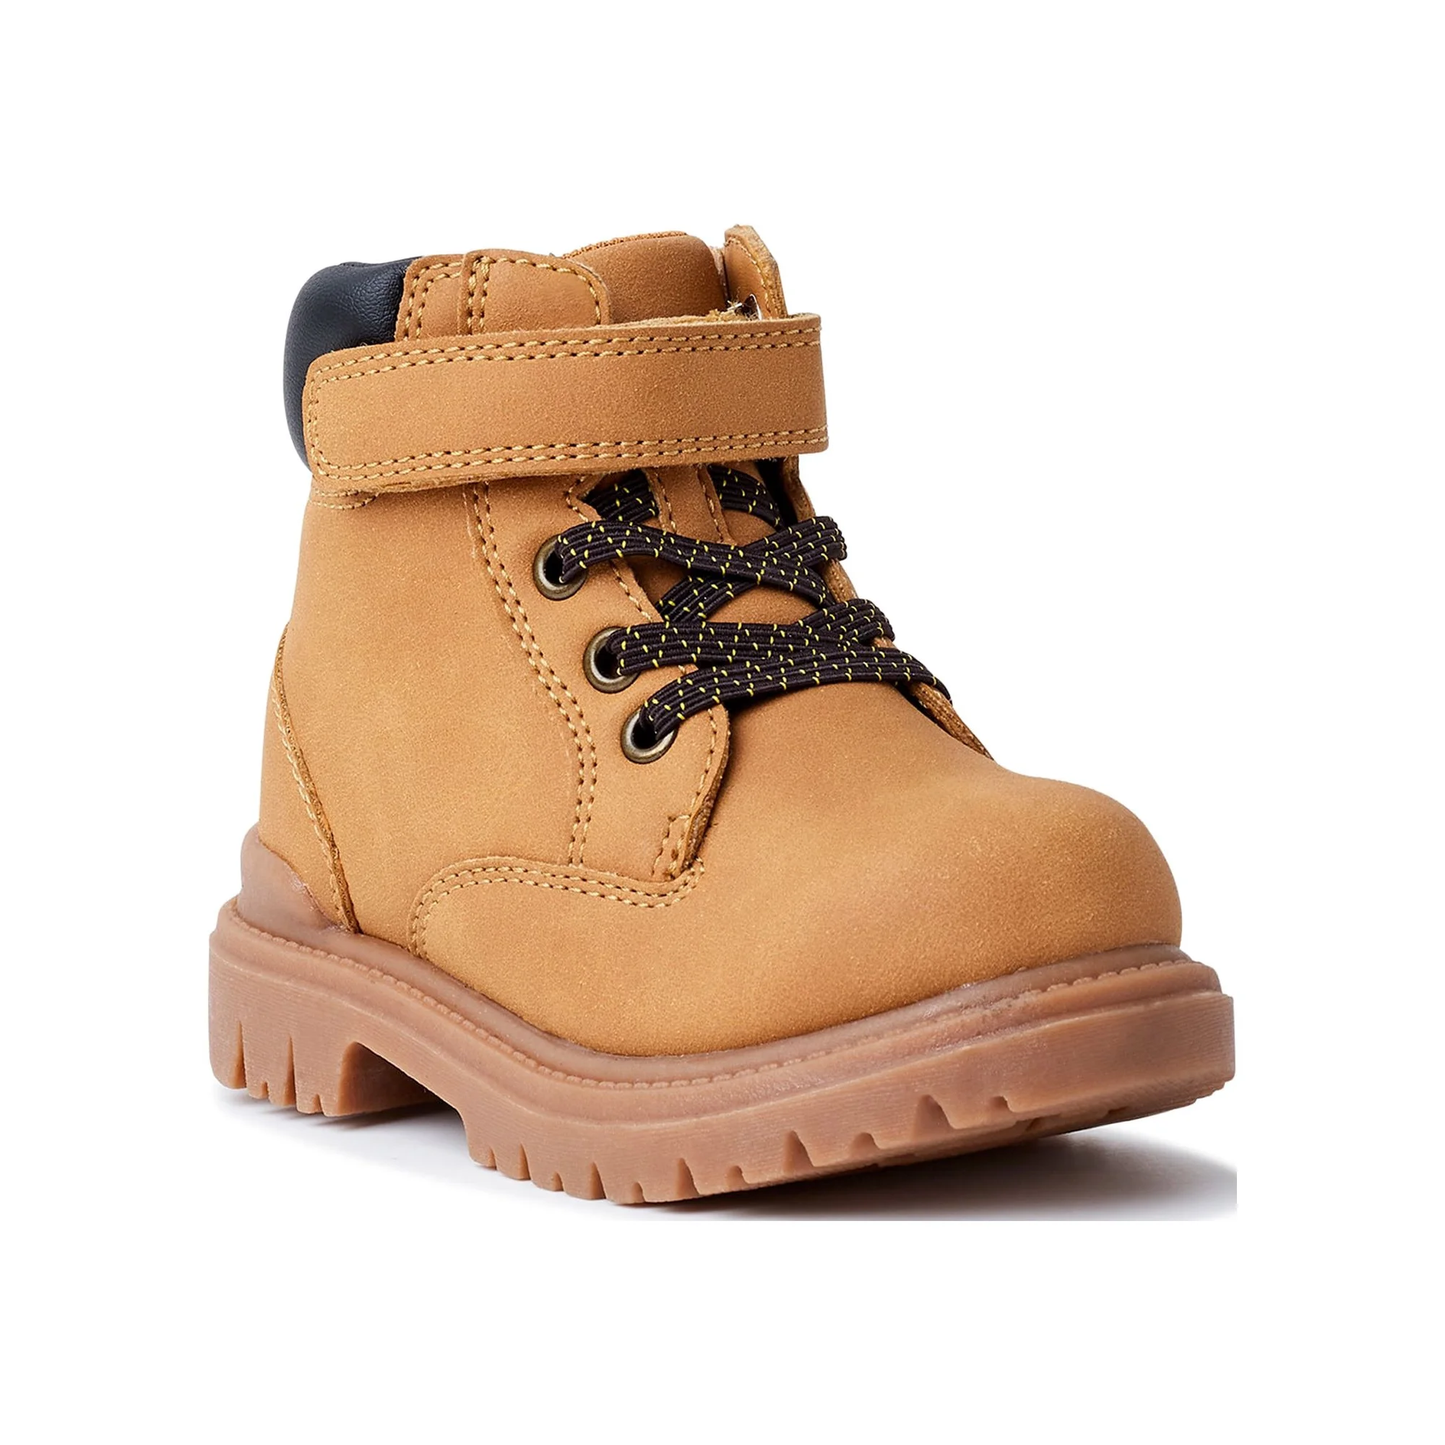 Toddler Boy's Tucker Lace Boot Sizes 7-12